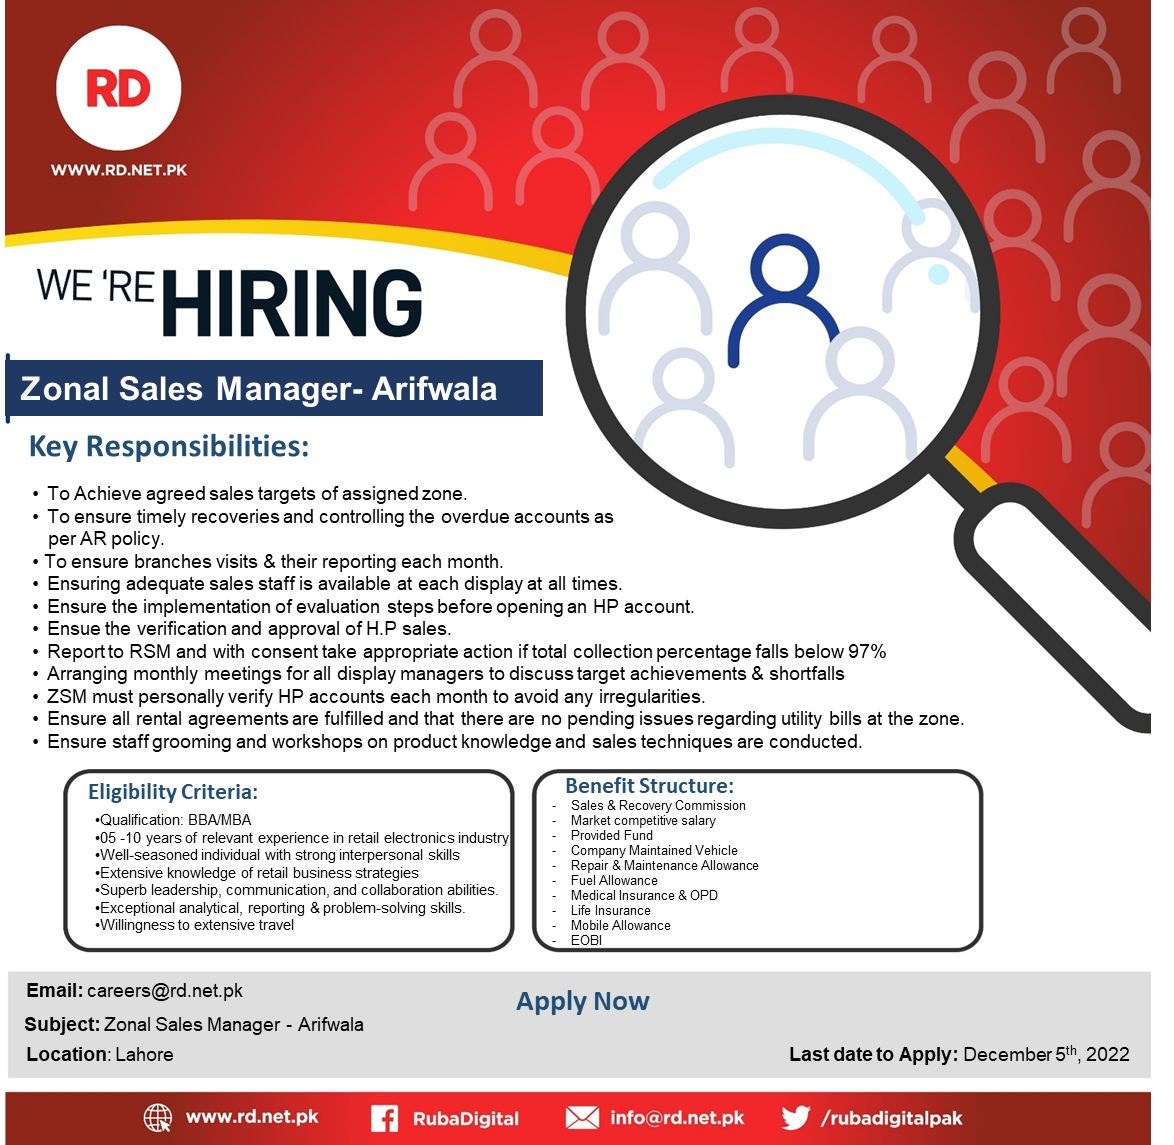 RD Ruba Digital Pvt Ltd Looking to hire Zonal Sales Manager